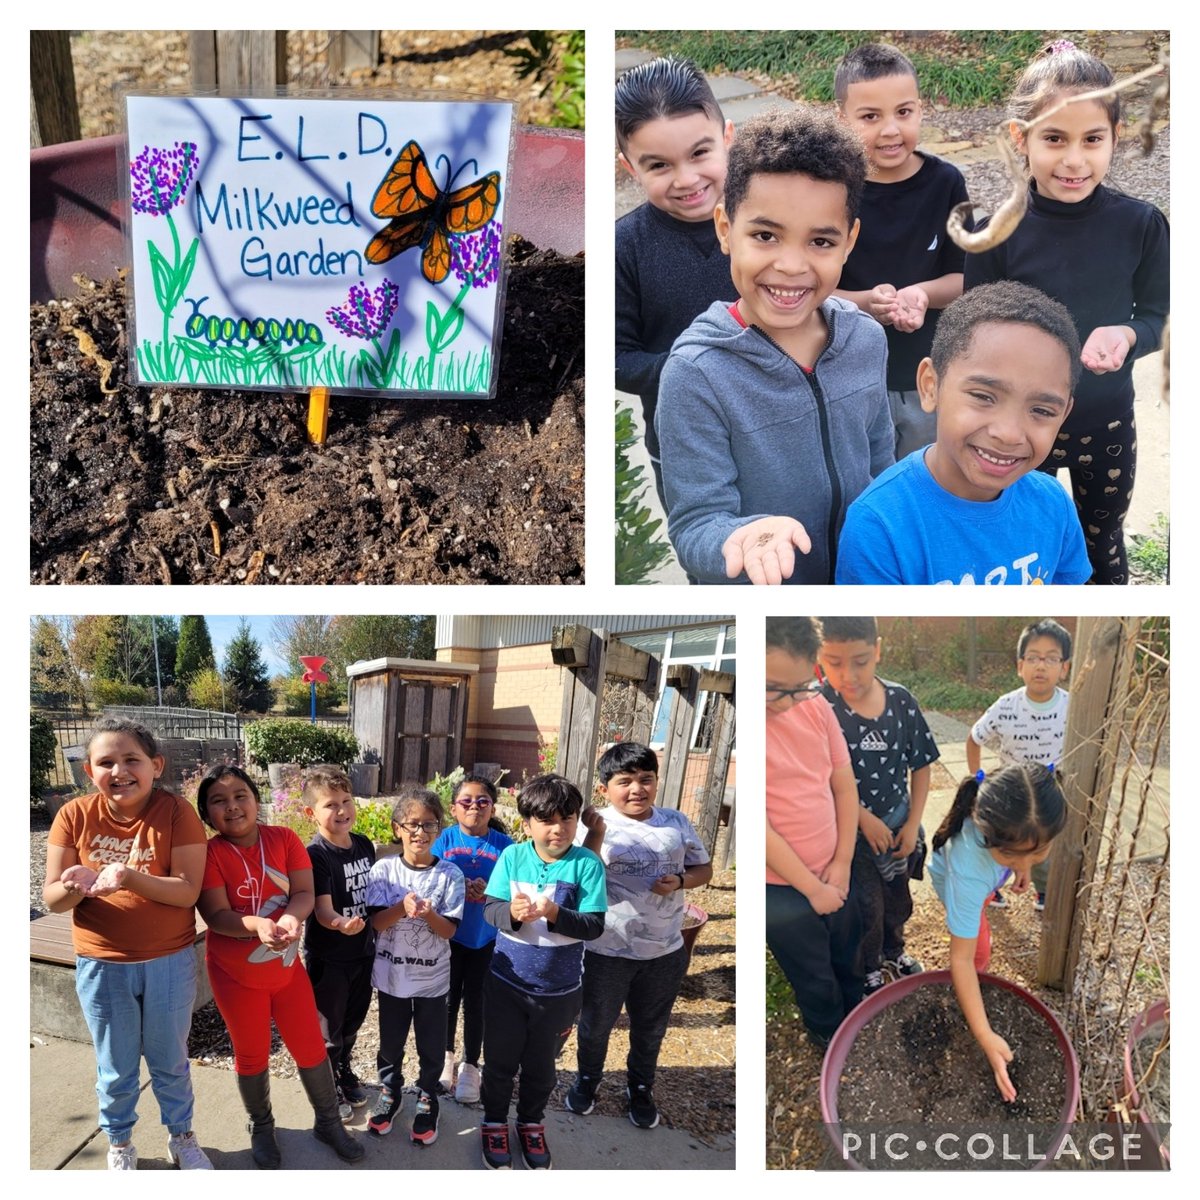 After last year's butterfly PBL, we wrote letters to #AmigosForMonarchs and requested milkweed seeds. Today we planted them for our next round of butterflies! @JulianaUrtubey3 we hear you do a butterfly PBL and garden too!